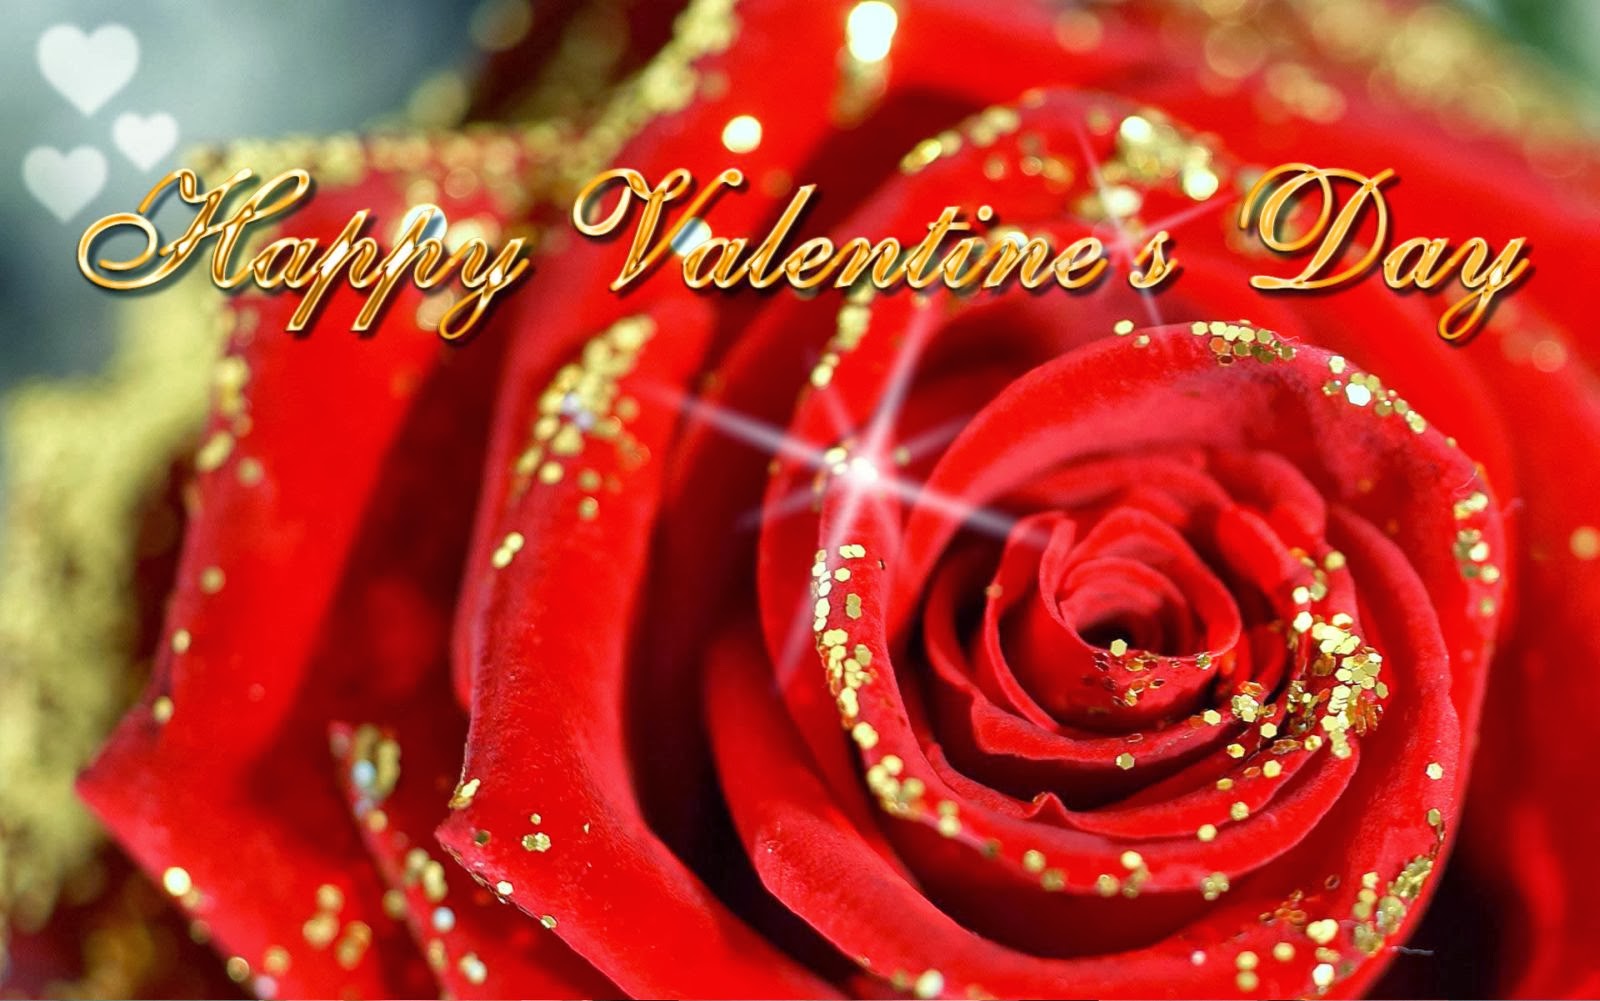  Wallpapers and Images Valentine day wallpaper downloads 1600x1001